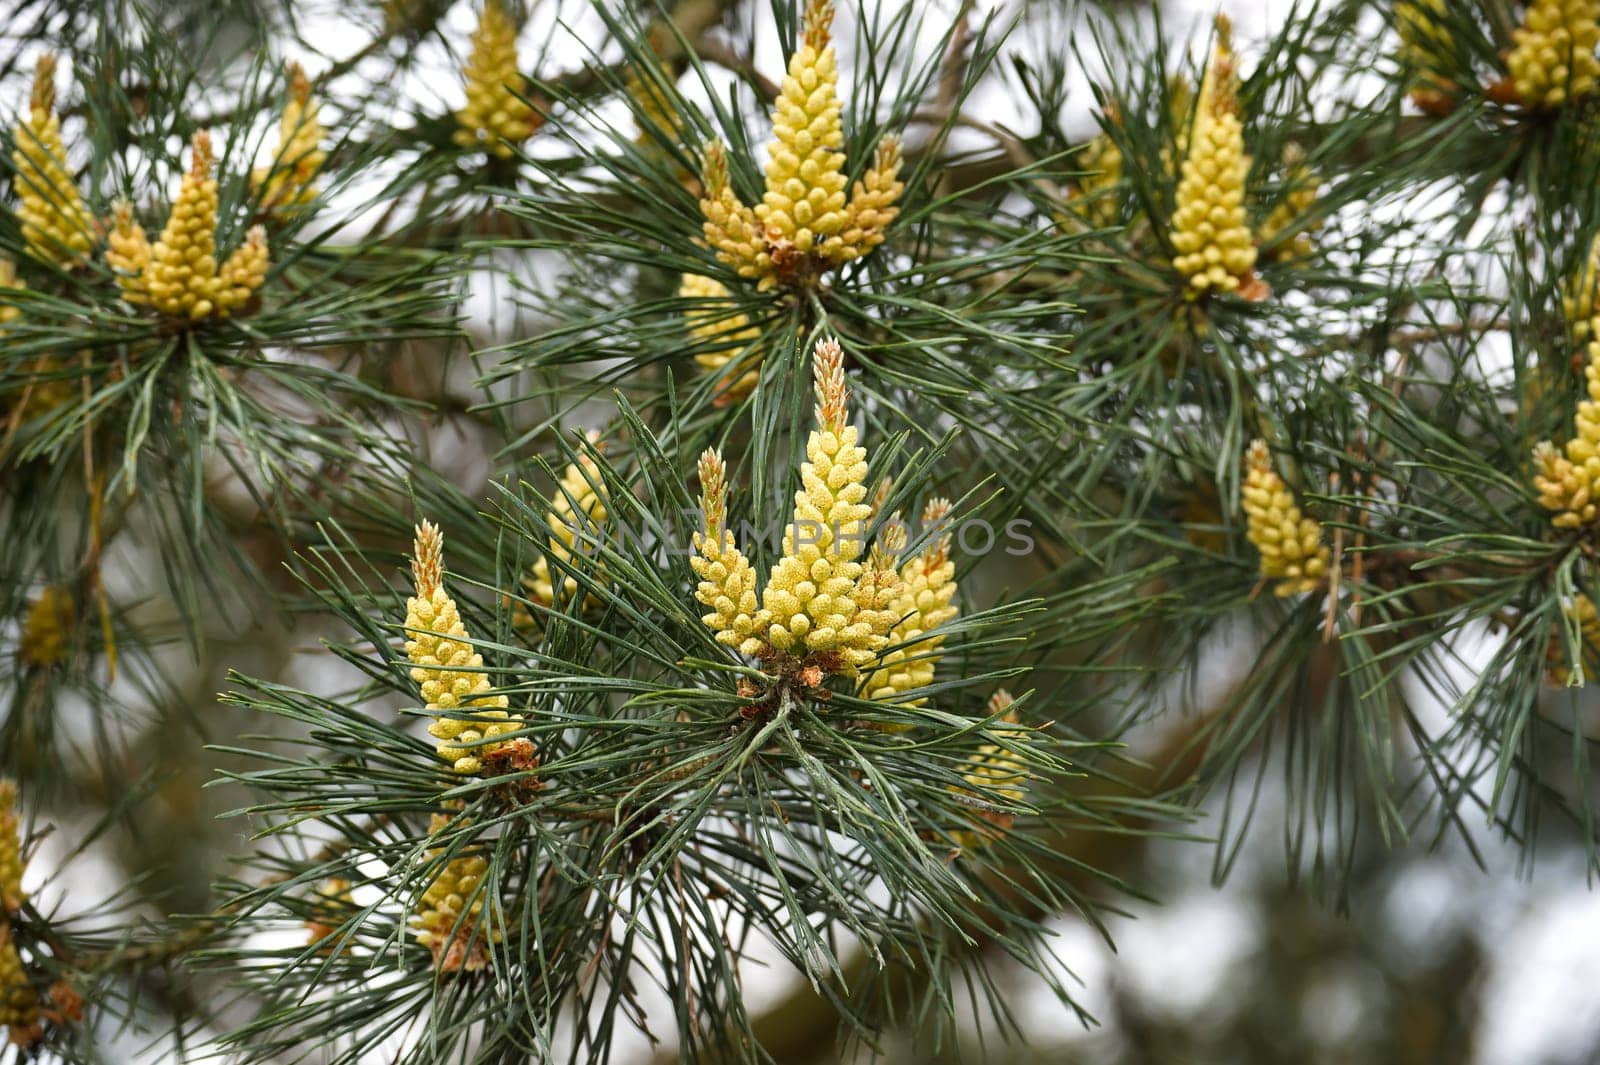 Close up view of a pine tree, showing off its branches with green needles and yellow cones or pollen